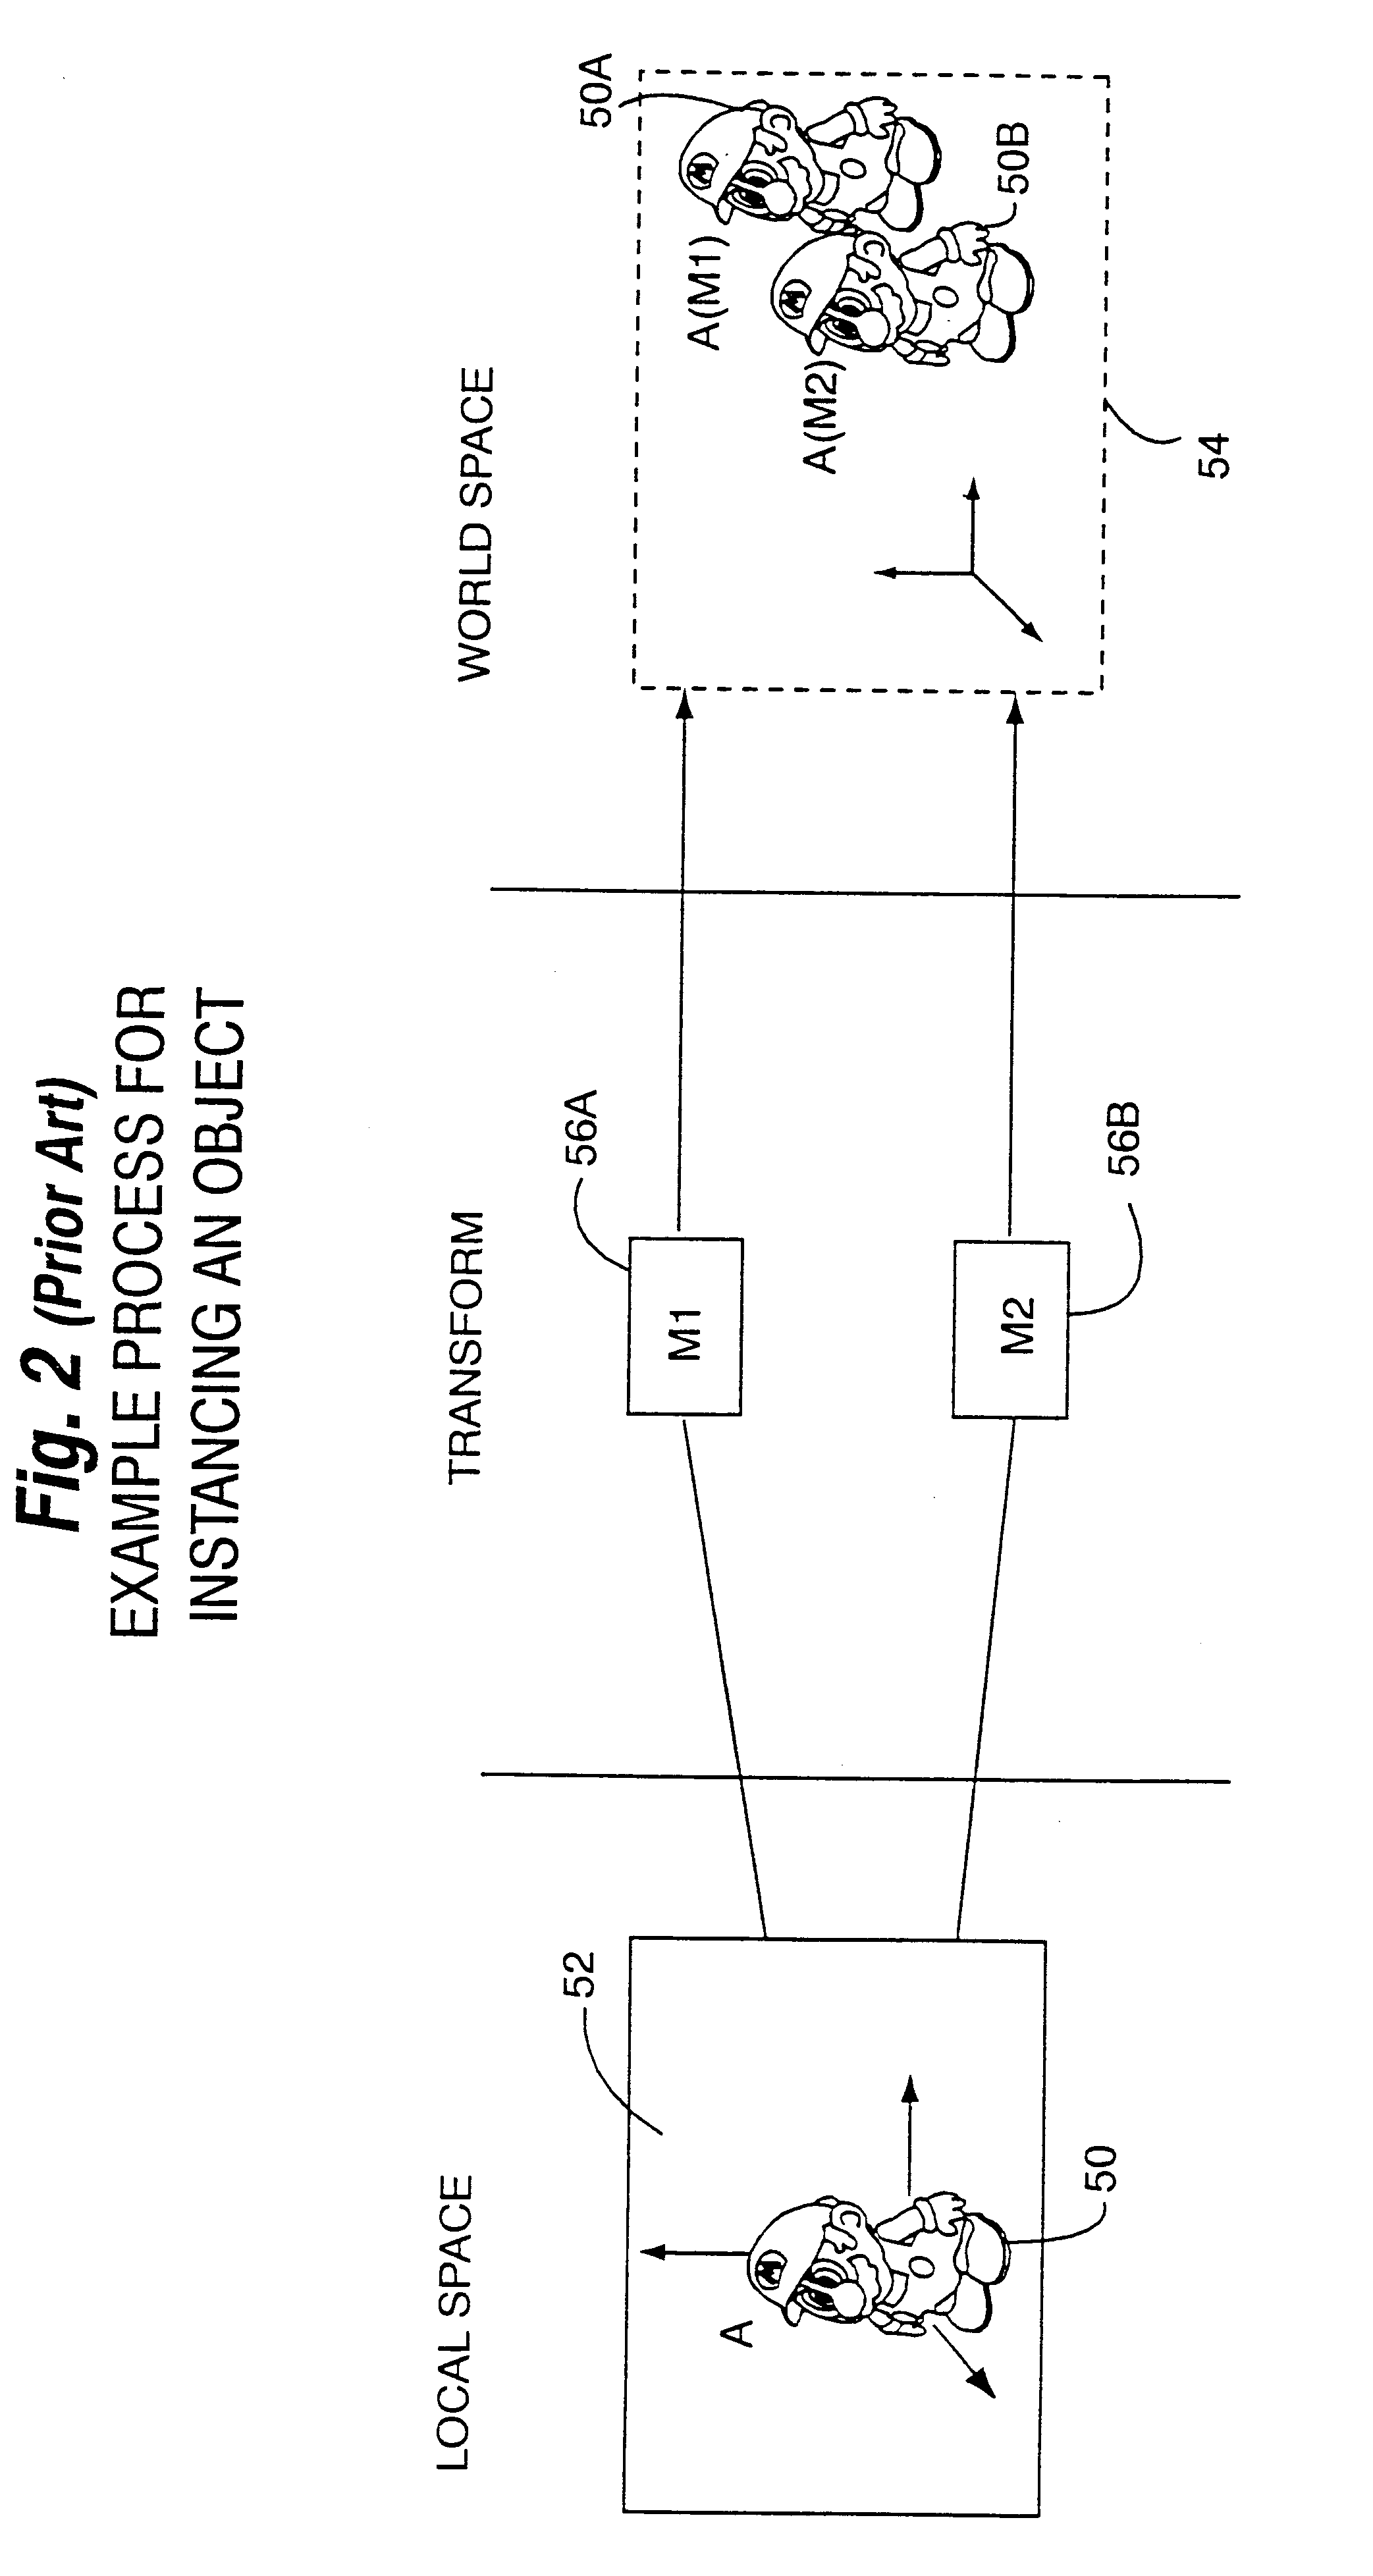 Method and apparatus for efficient animation and collision detection using local coordinate systems